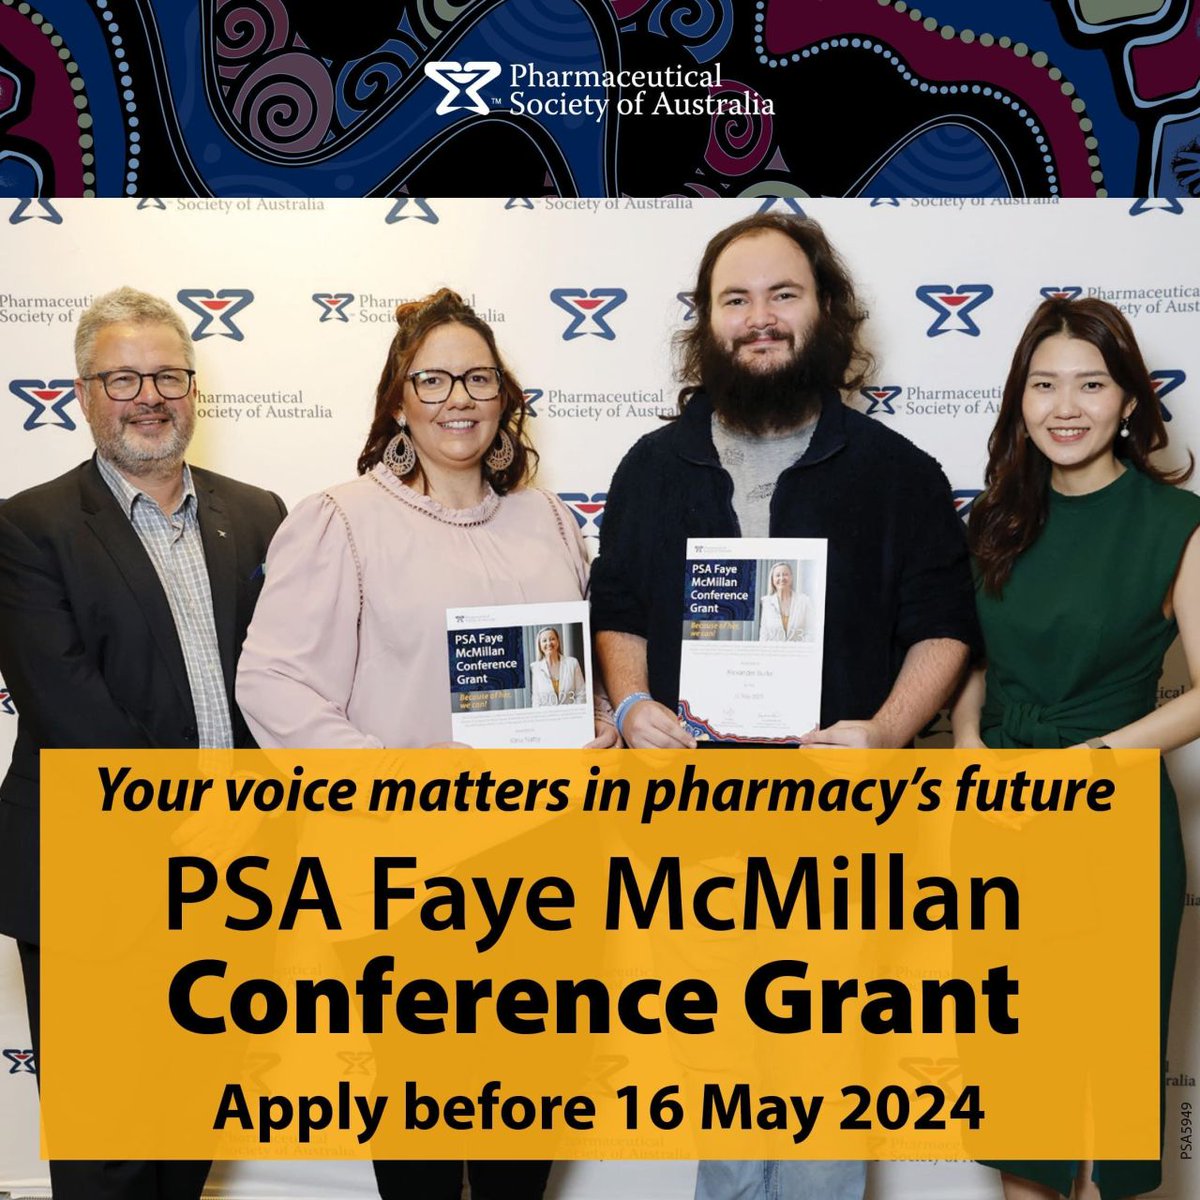 Attention First Nations pharmacists! Here’s a unique chance to attend the @PSA_National National Conference & connect with peers nationwide Apply before the May 16 deadline: buff.ly/3VKsnWH #PSAGrant #PSA24 #PSAFayeMcMillanGrant